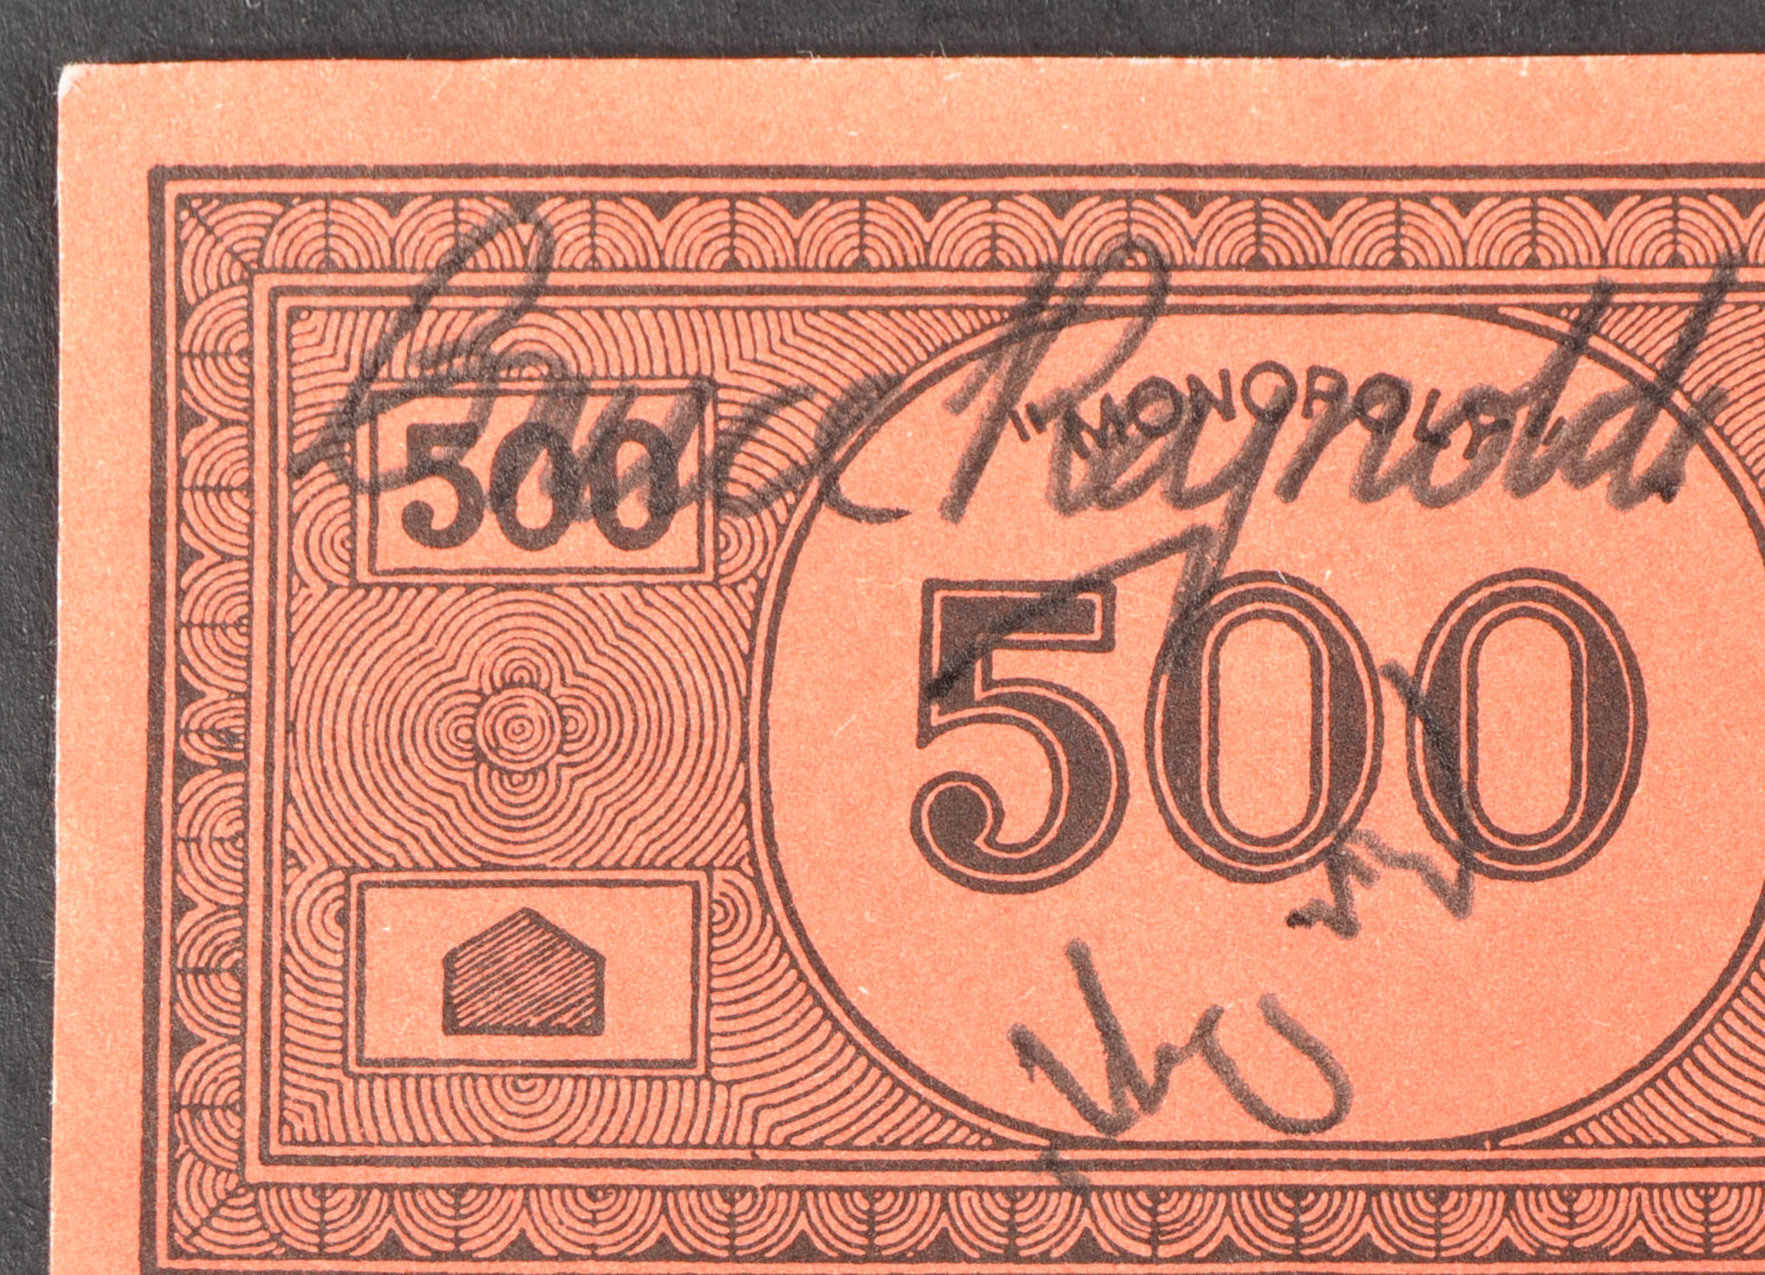 THE GREAT TRAIN ROBBERY - DUAL SIGNED MONOPOLY BANK NOTE - Image 2 of 3